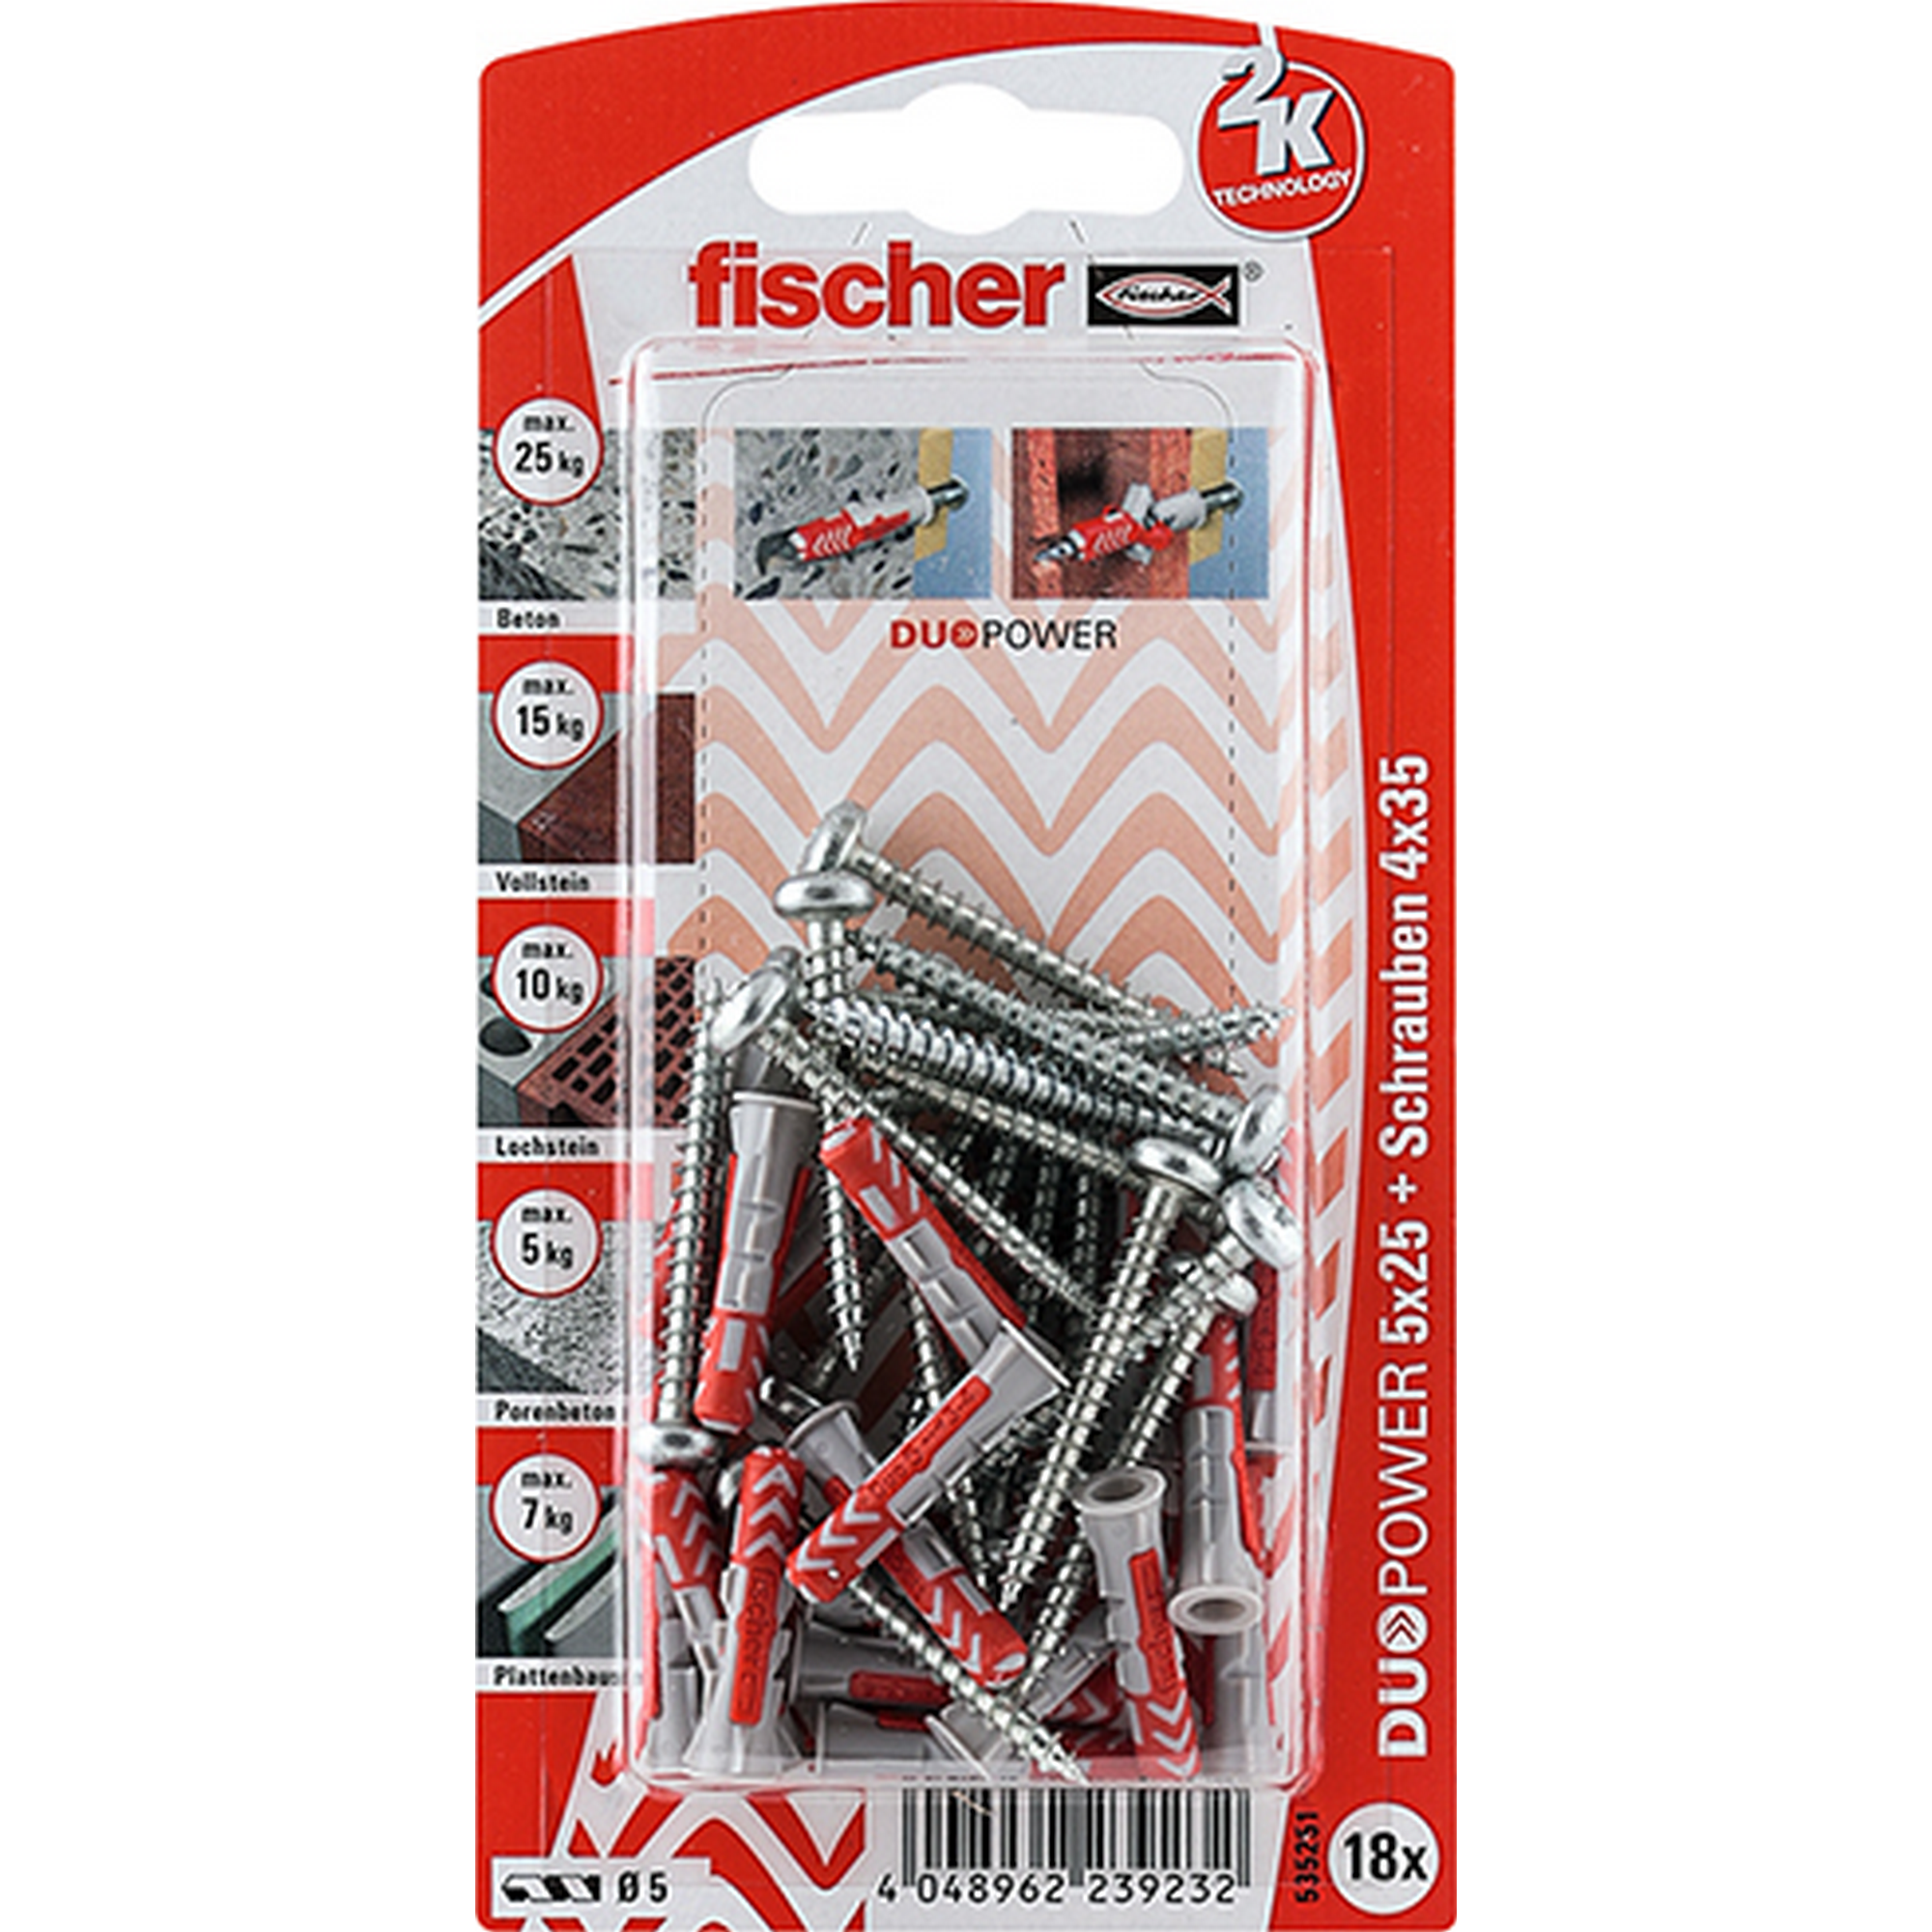 fischer DUOPOWER 5 x 25 S PH 18 Stück + product picture